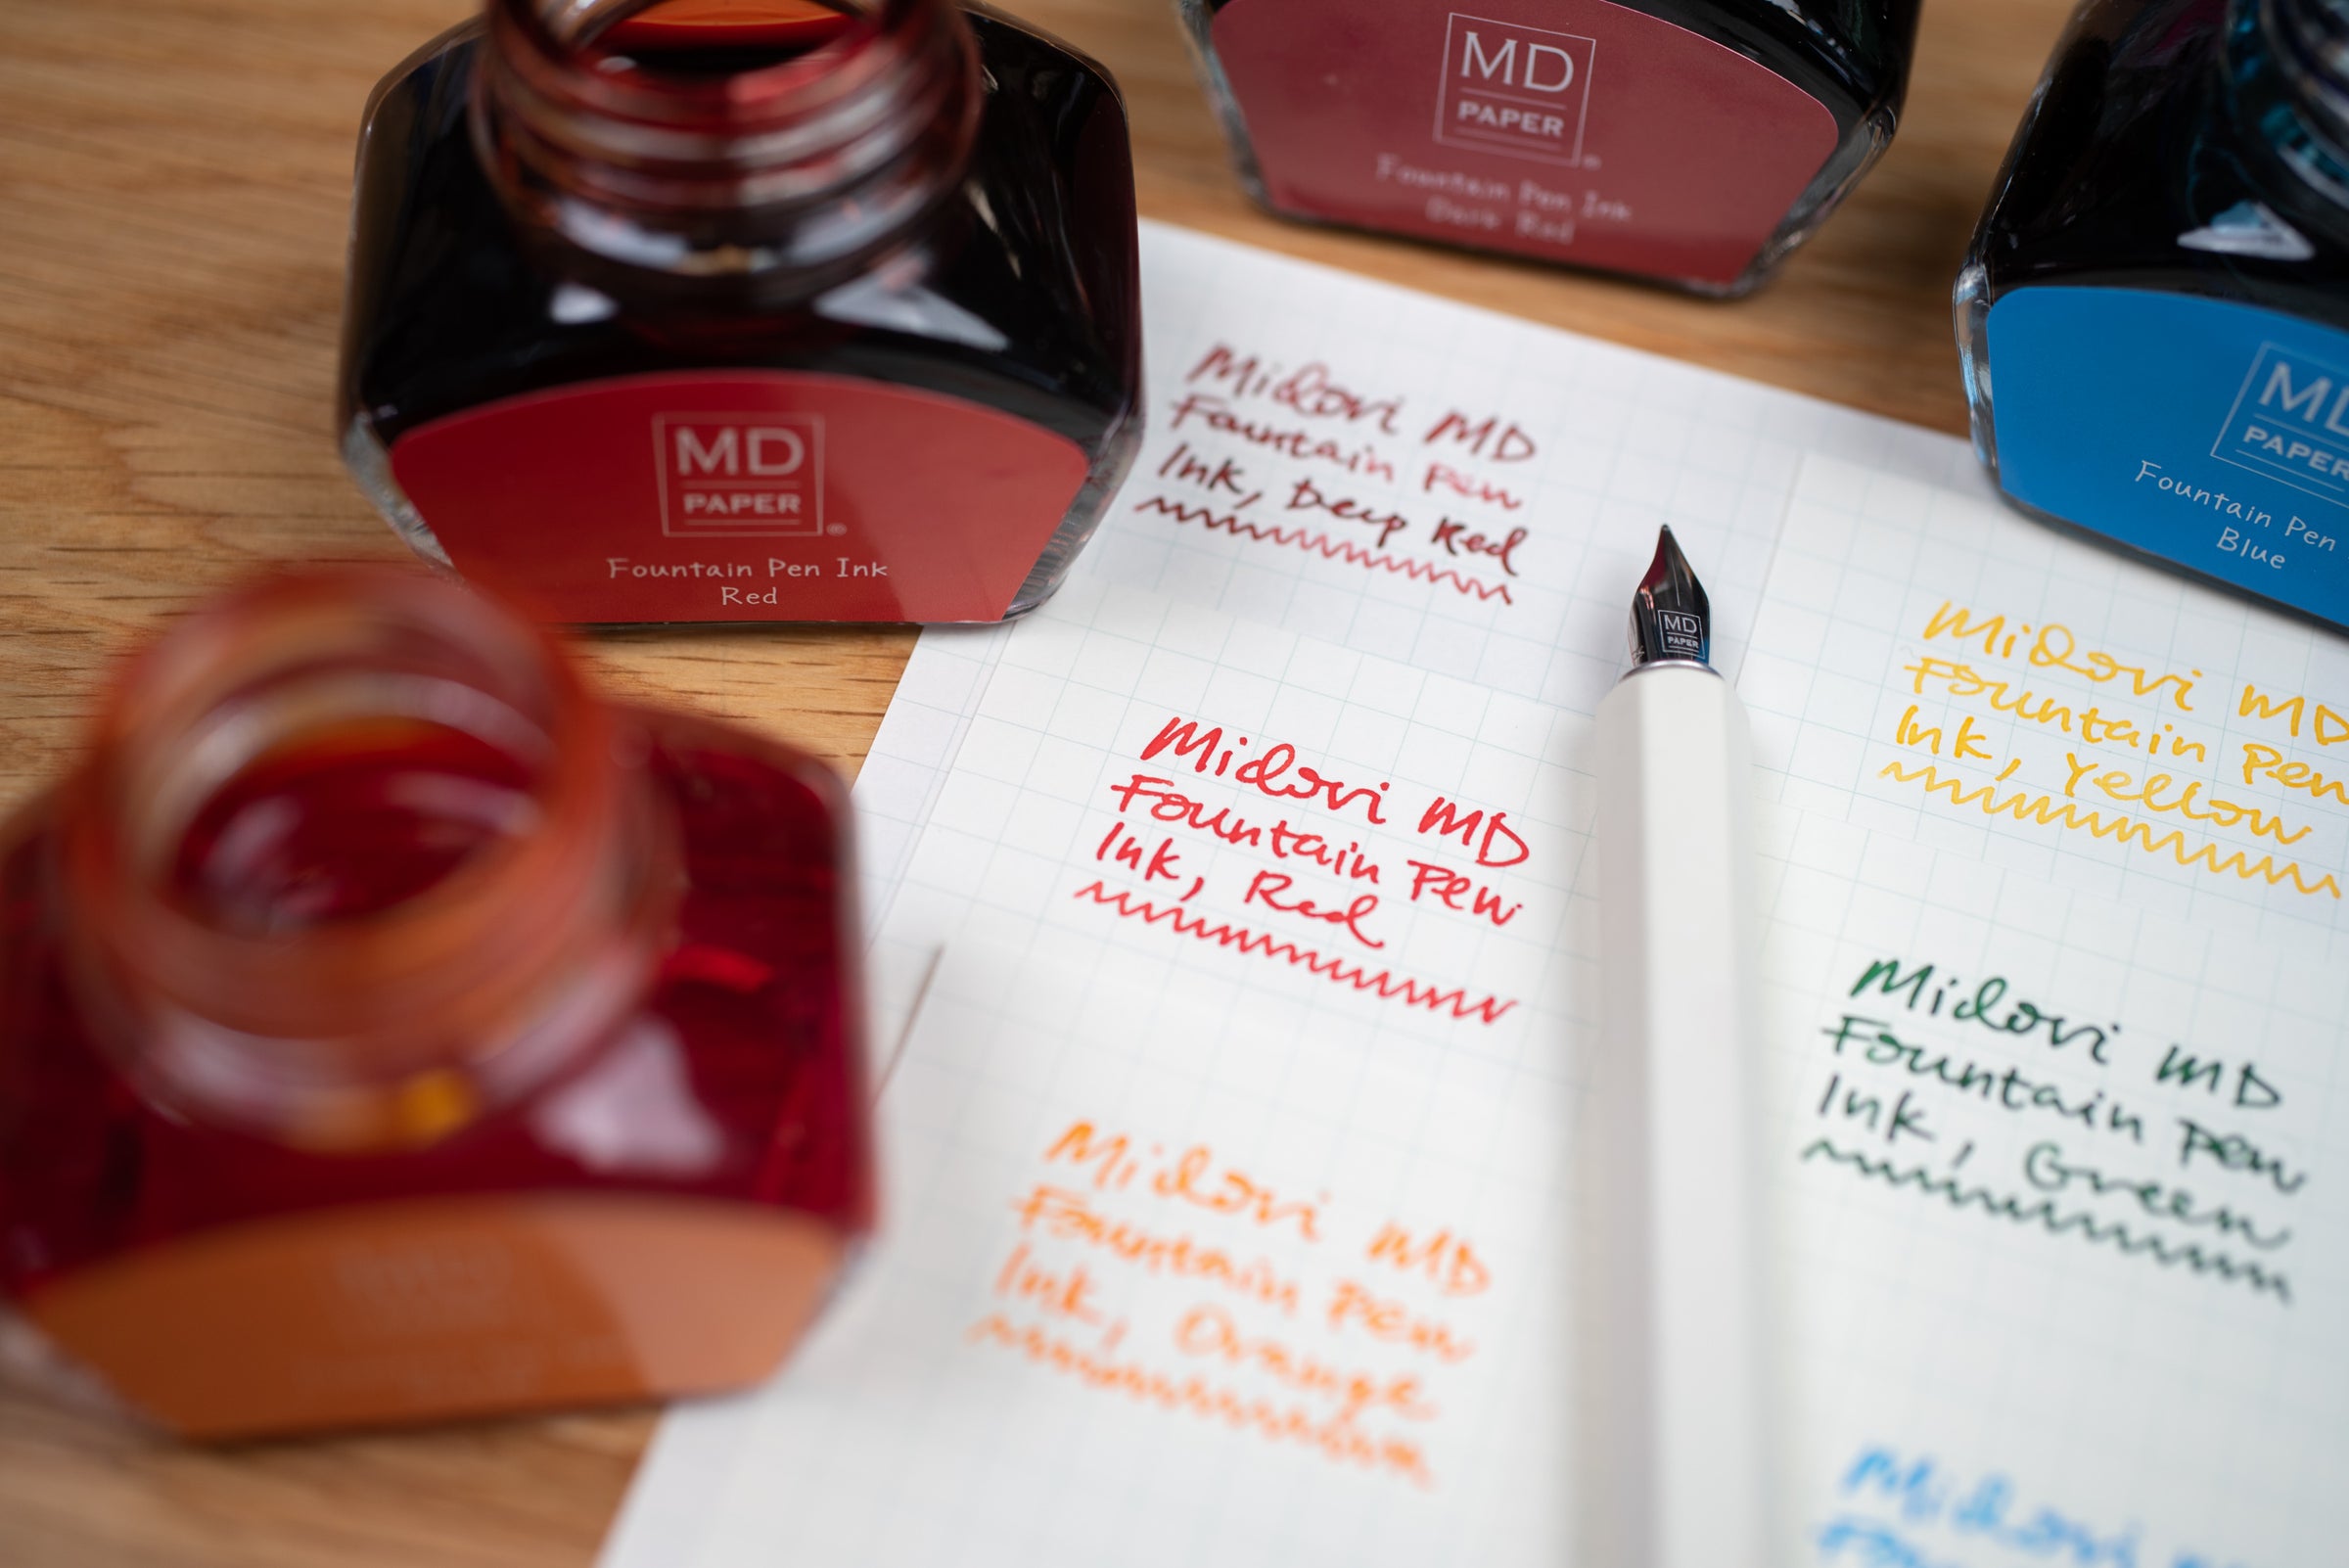 MD Fountain Pen Ink, Red – St. Louis Art Supply